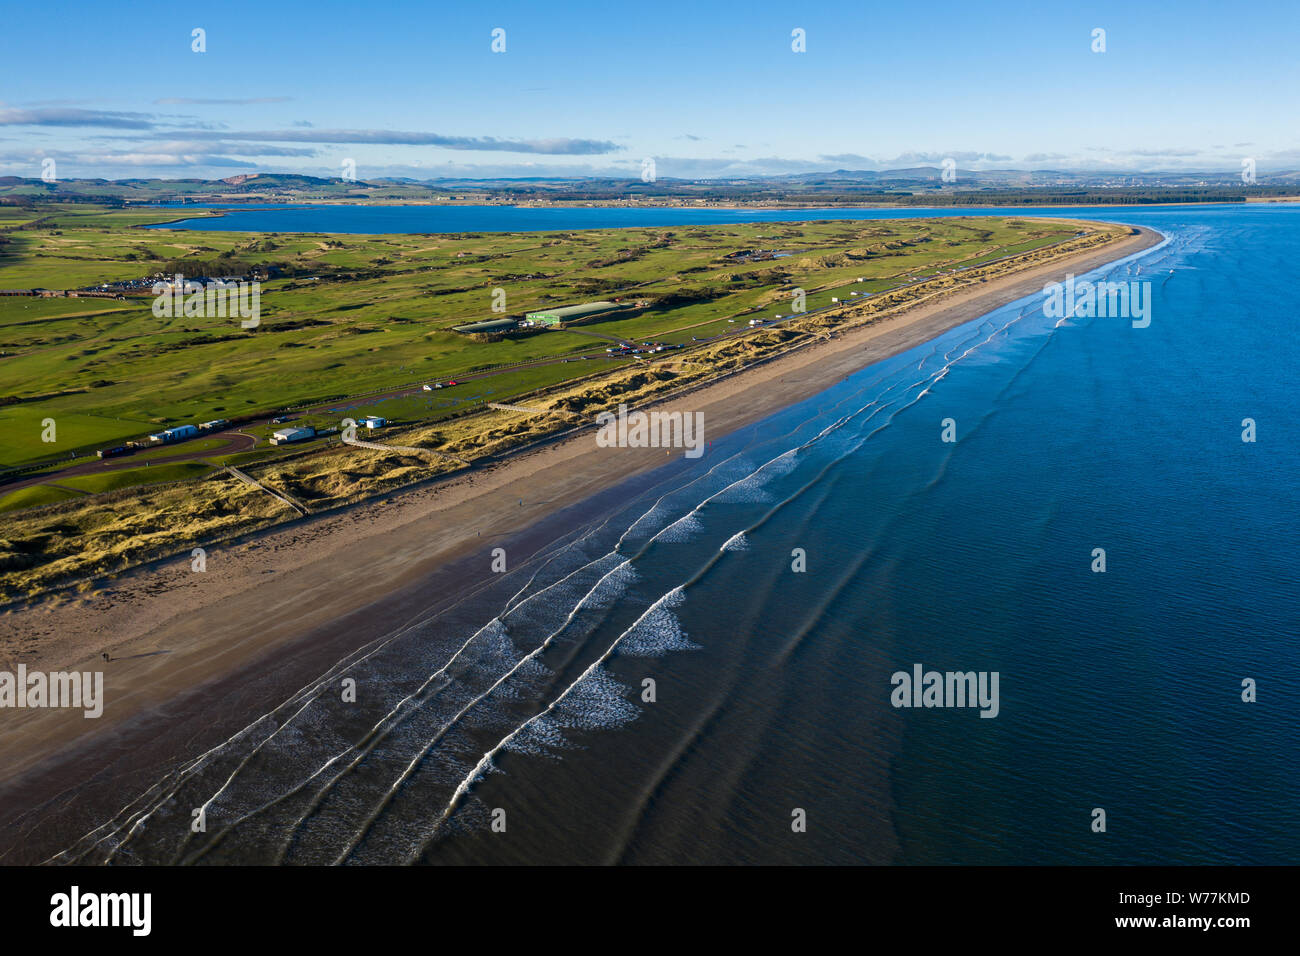 Aerial view of St Andrews' famous West Sands beach with waves rolling in. This peninsula also contains the famous golf links courses. Stock Photo